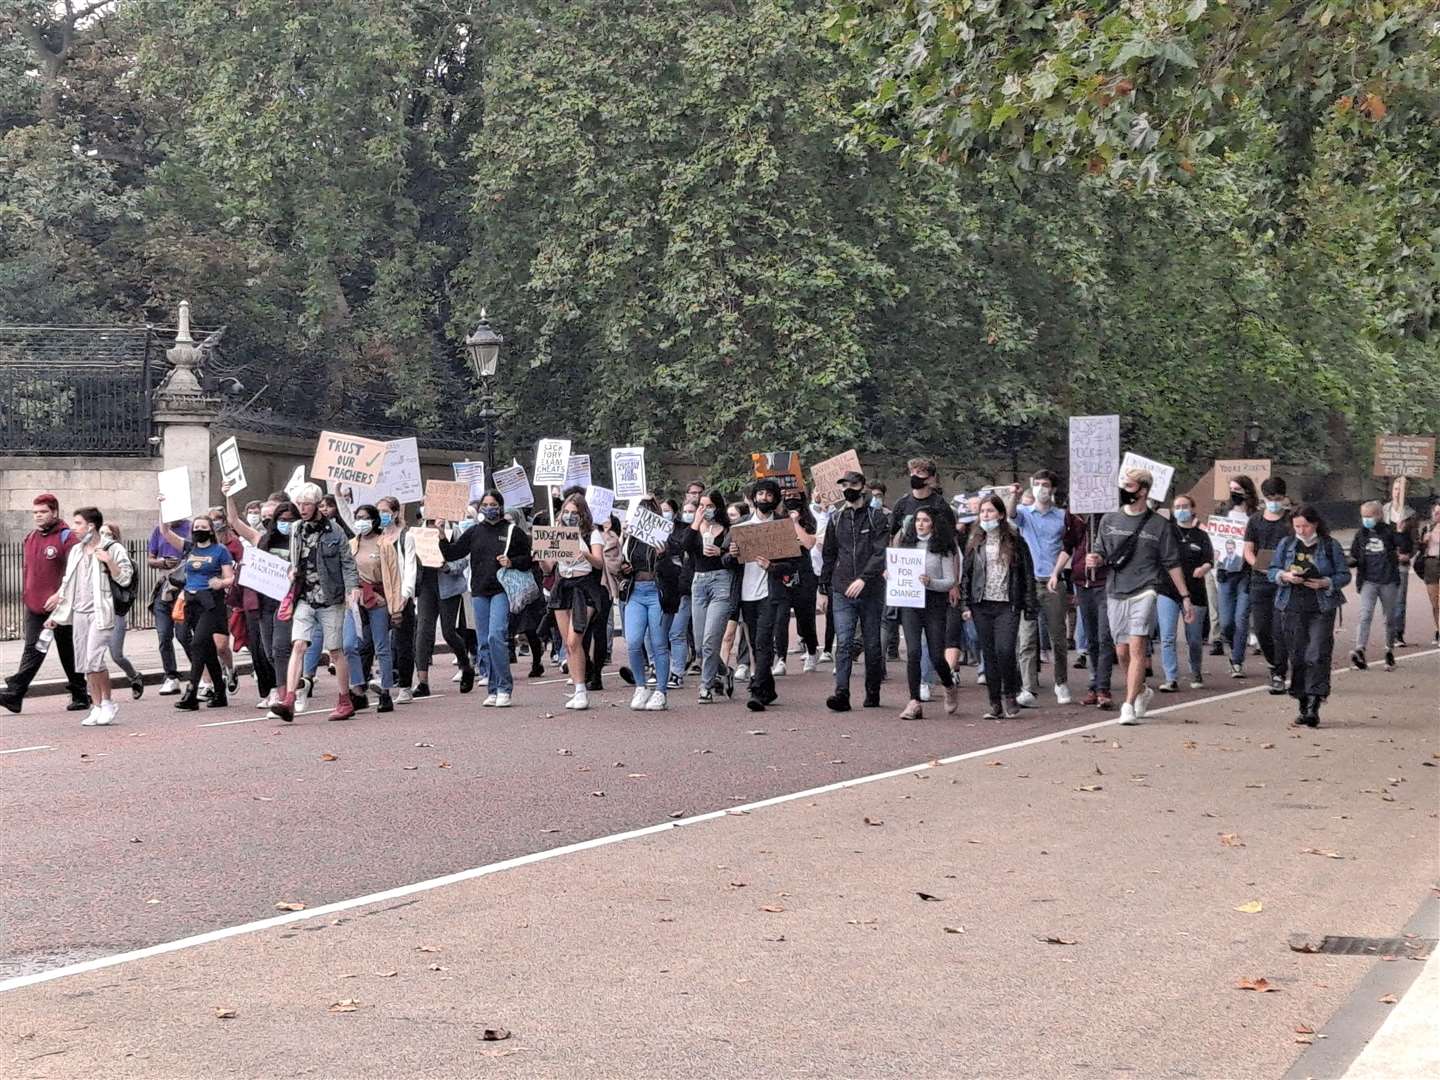 Dozens of A-level pupils marched outside Buckingham Palace in today's protest over the results fiasco